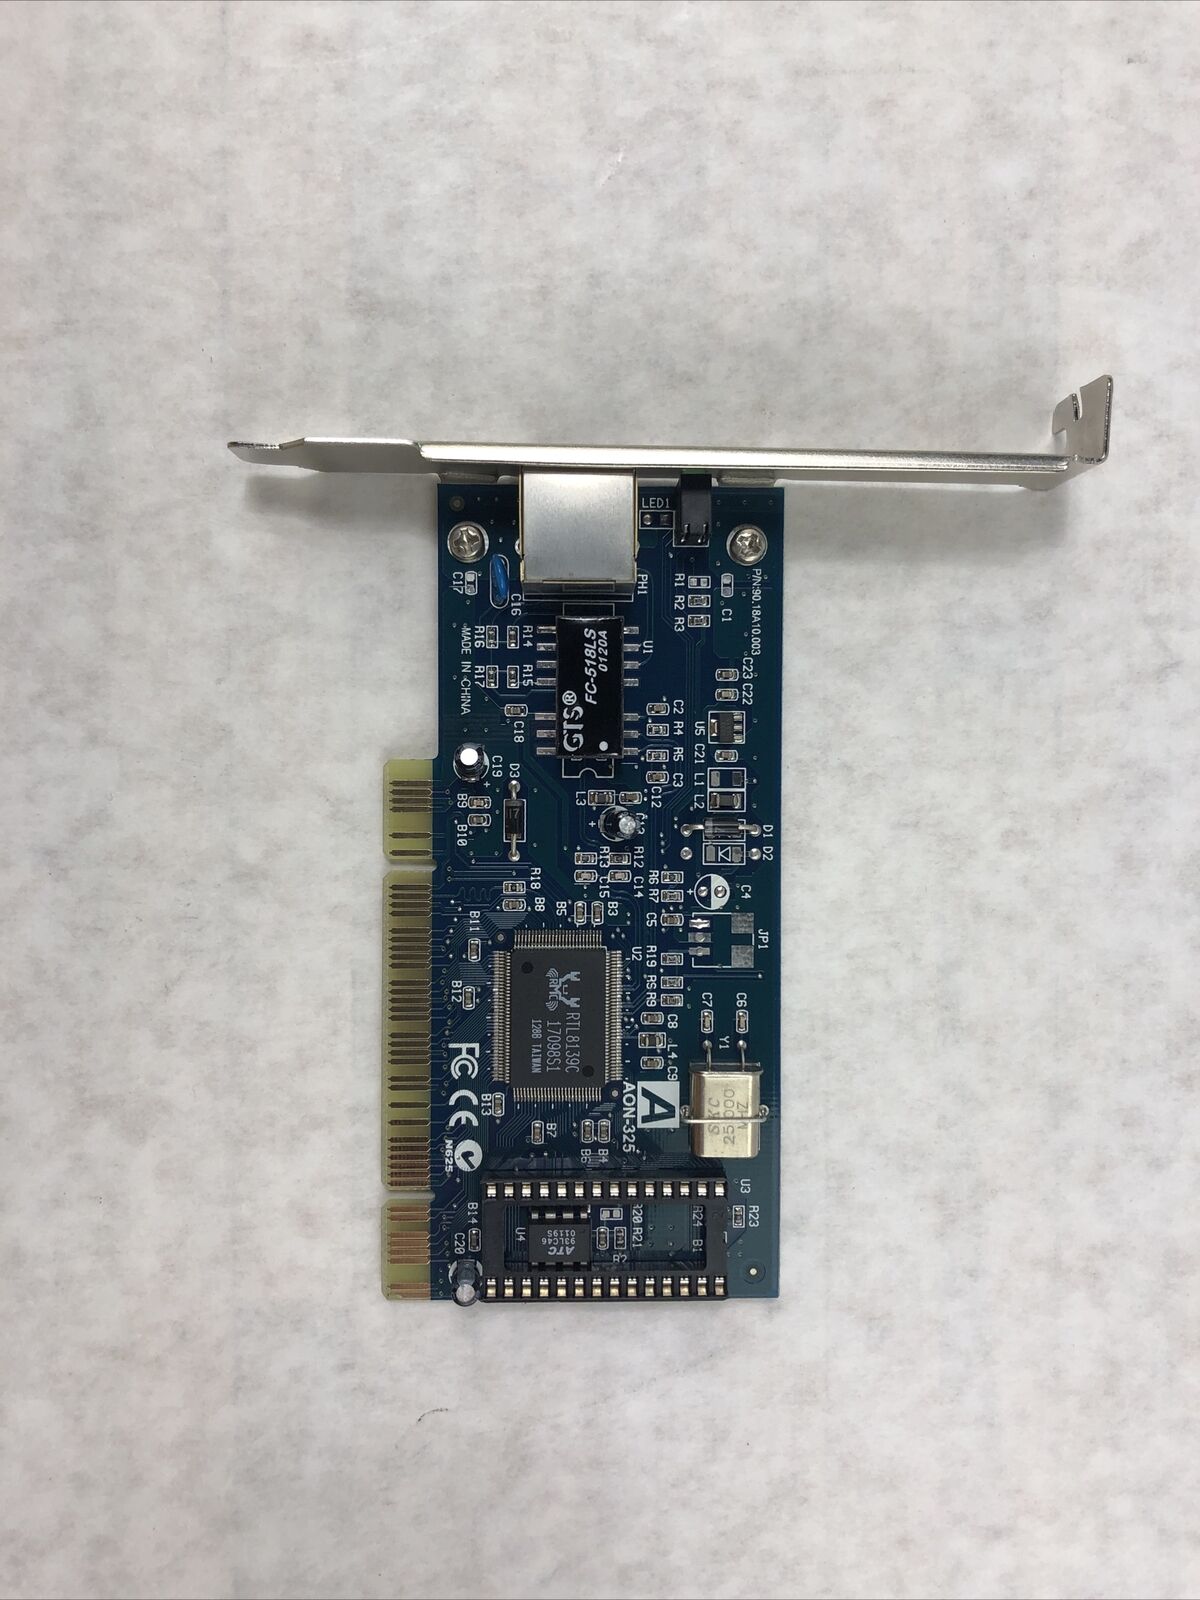 Acer AOpen AON-325 90.18A10.003 10/100Mbps Network Card